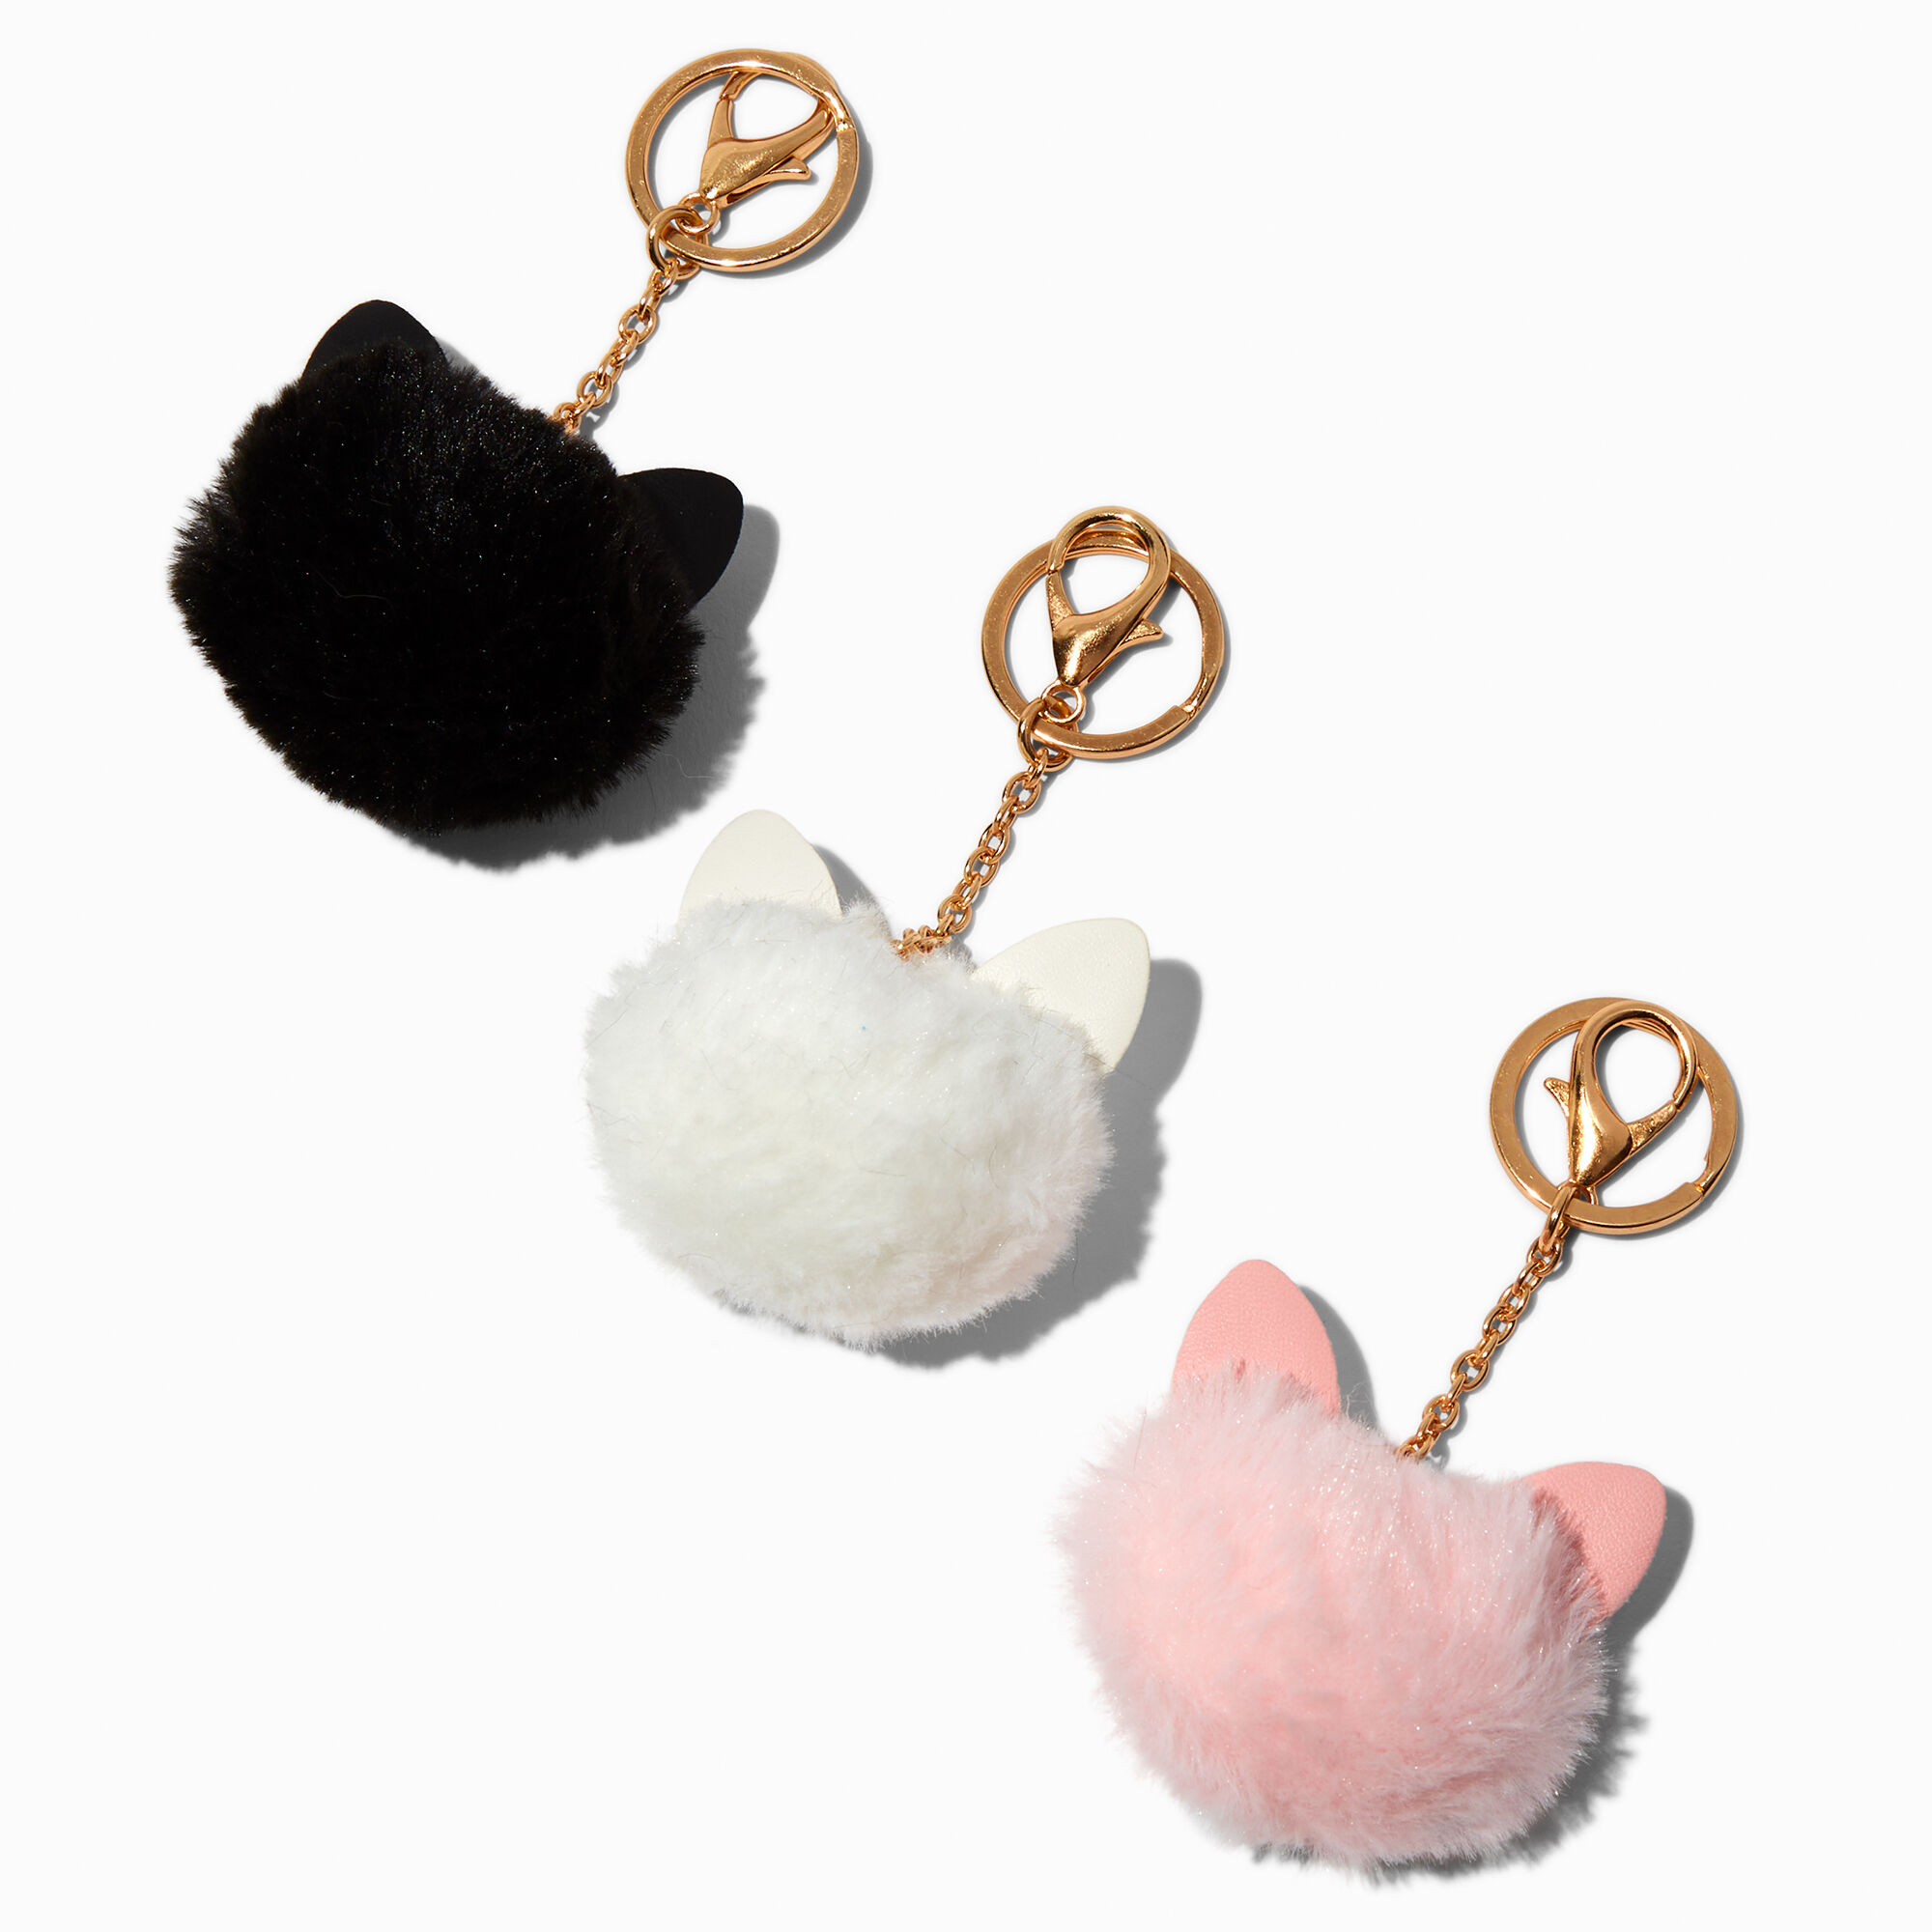 View Claires Pom Cat Keyrings 3 Pack Gold information